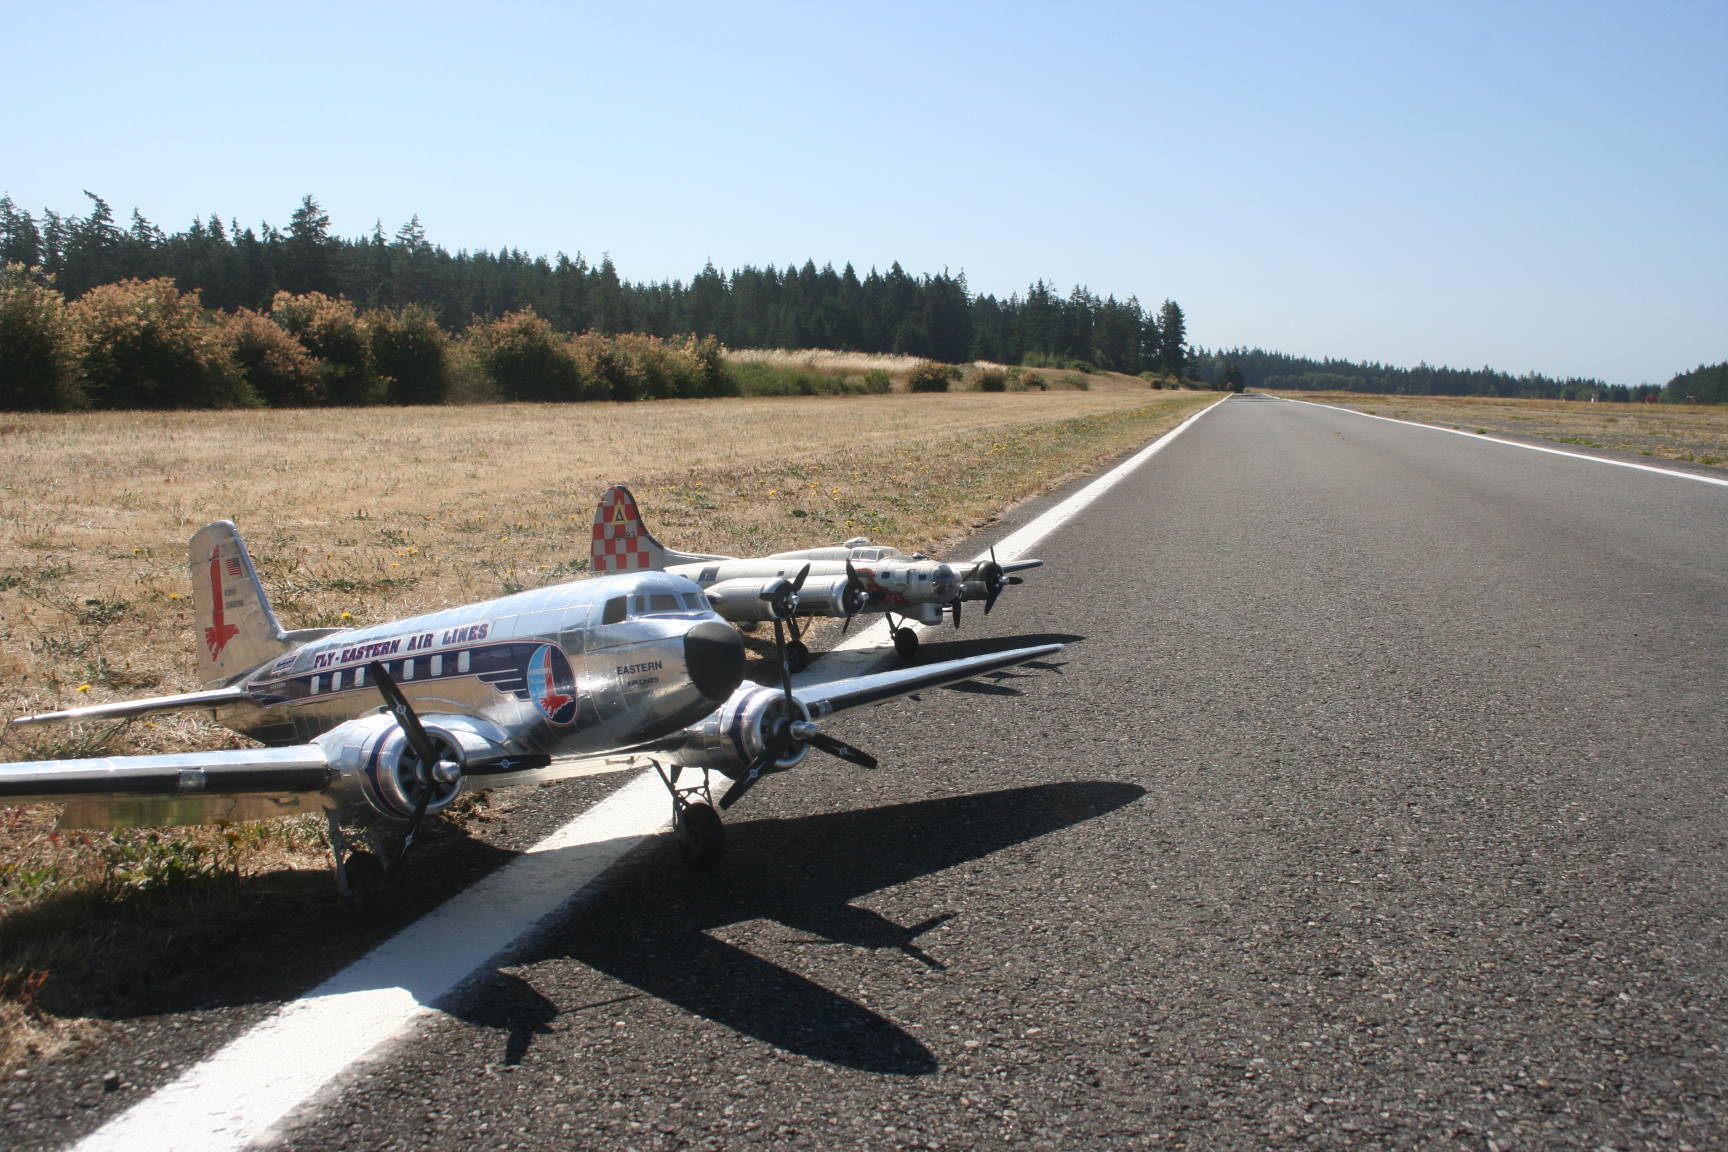 Whidbey Island Radio Control society members come out to Naval Outlying Field on most Saturday mornings to fly class model airplanes and other aircraft, such as these. Photo by Emily Gilbert/Whidbey News-Times